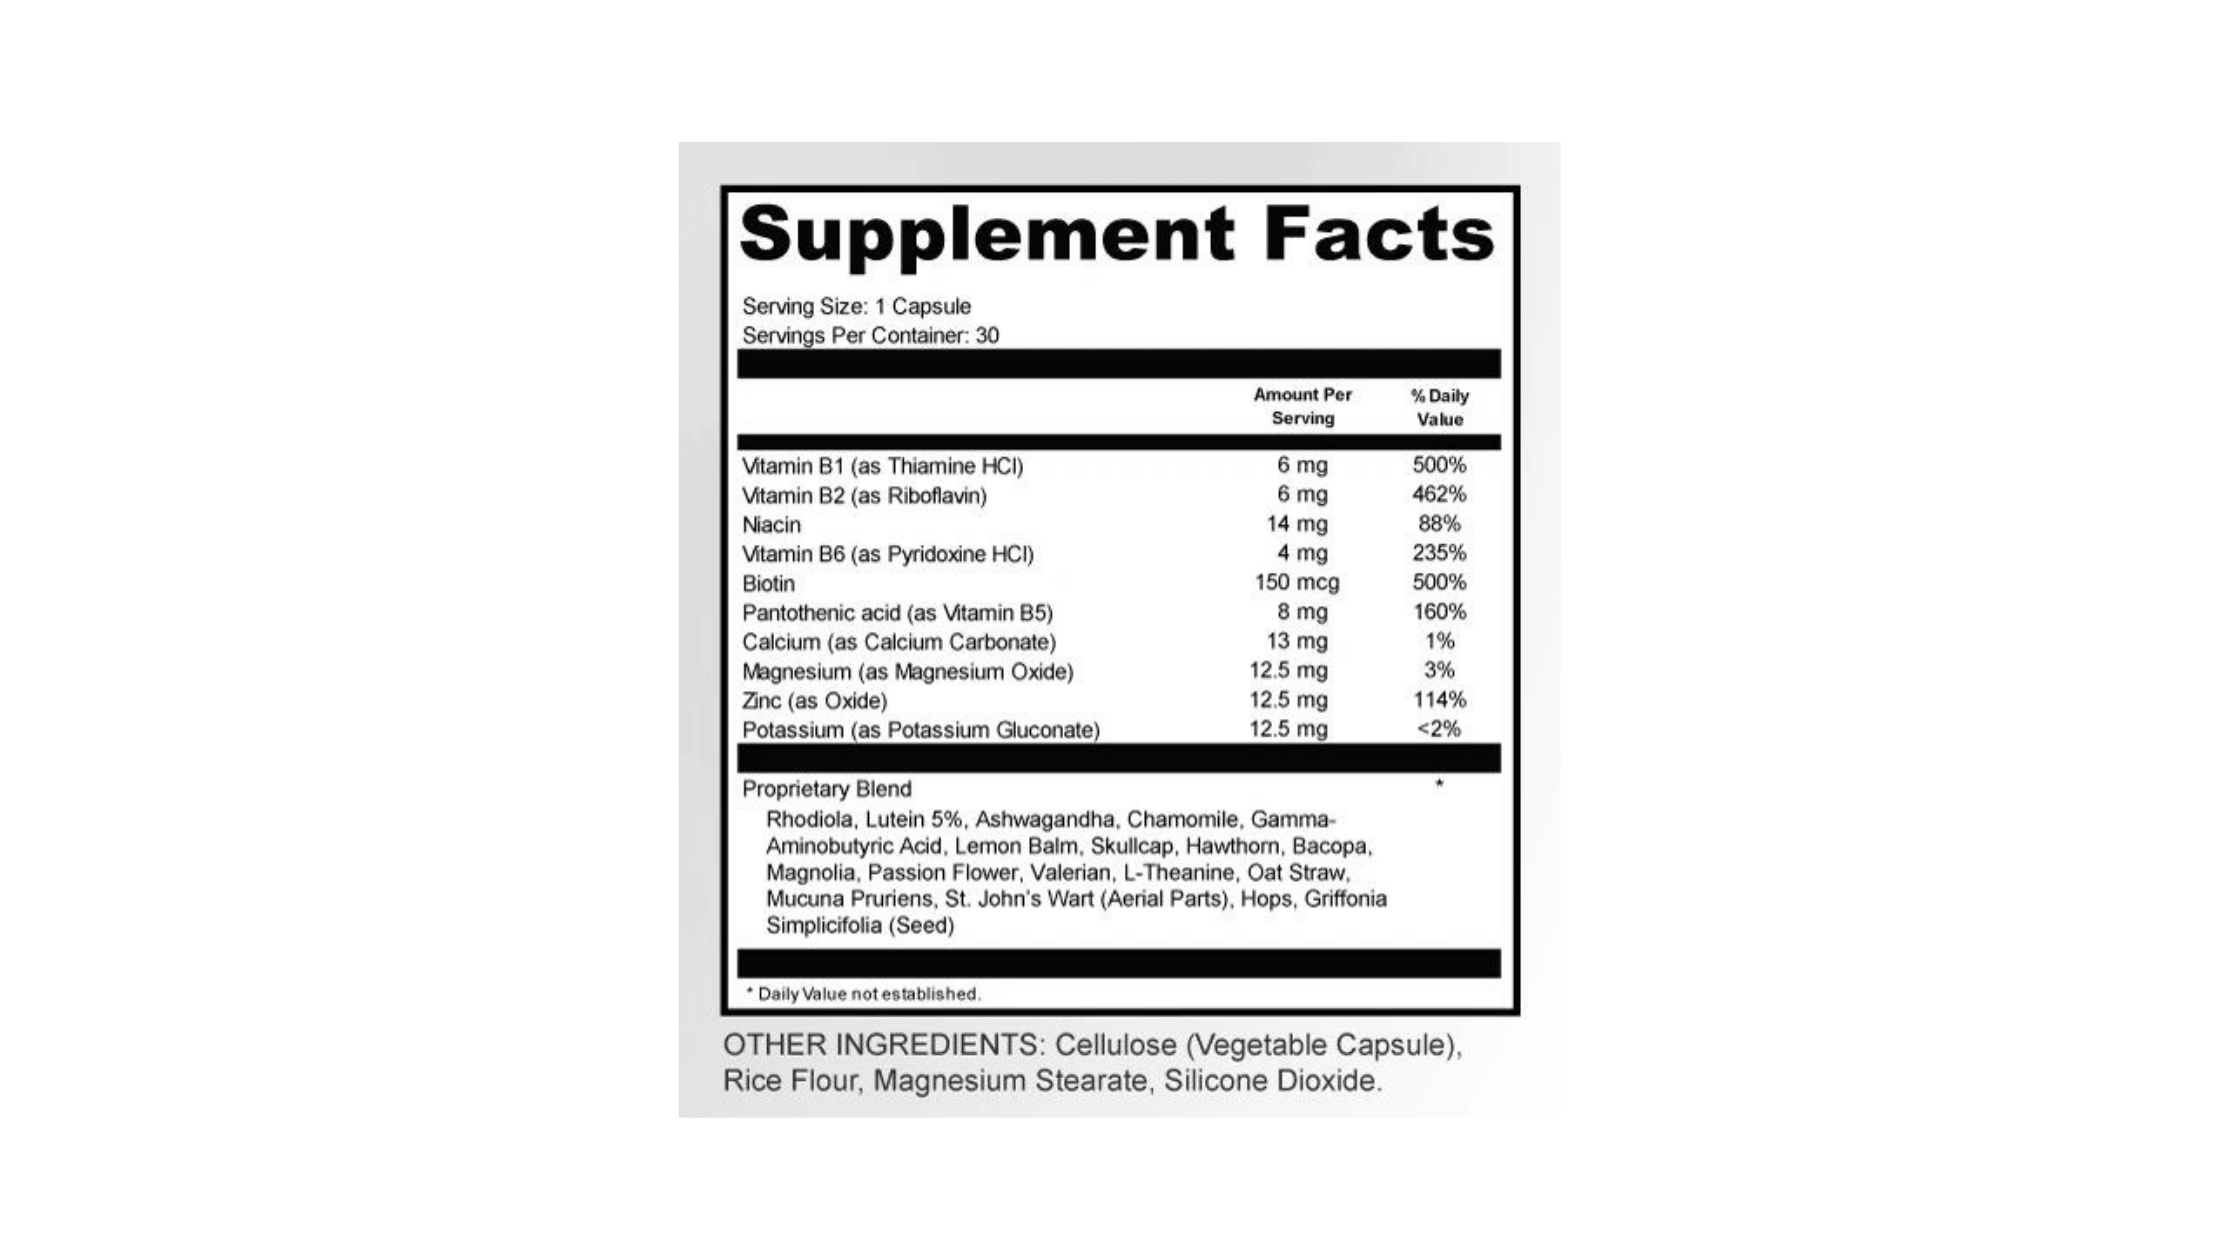 Clear Sound 911 supplement facts